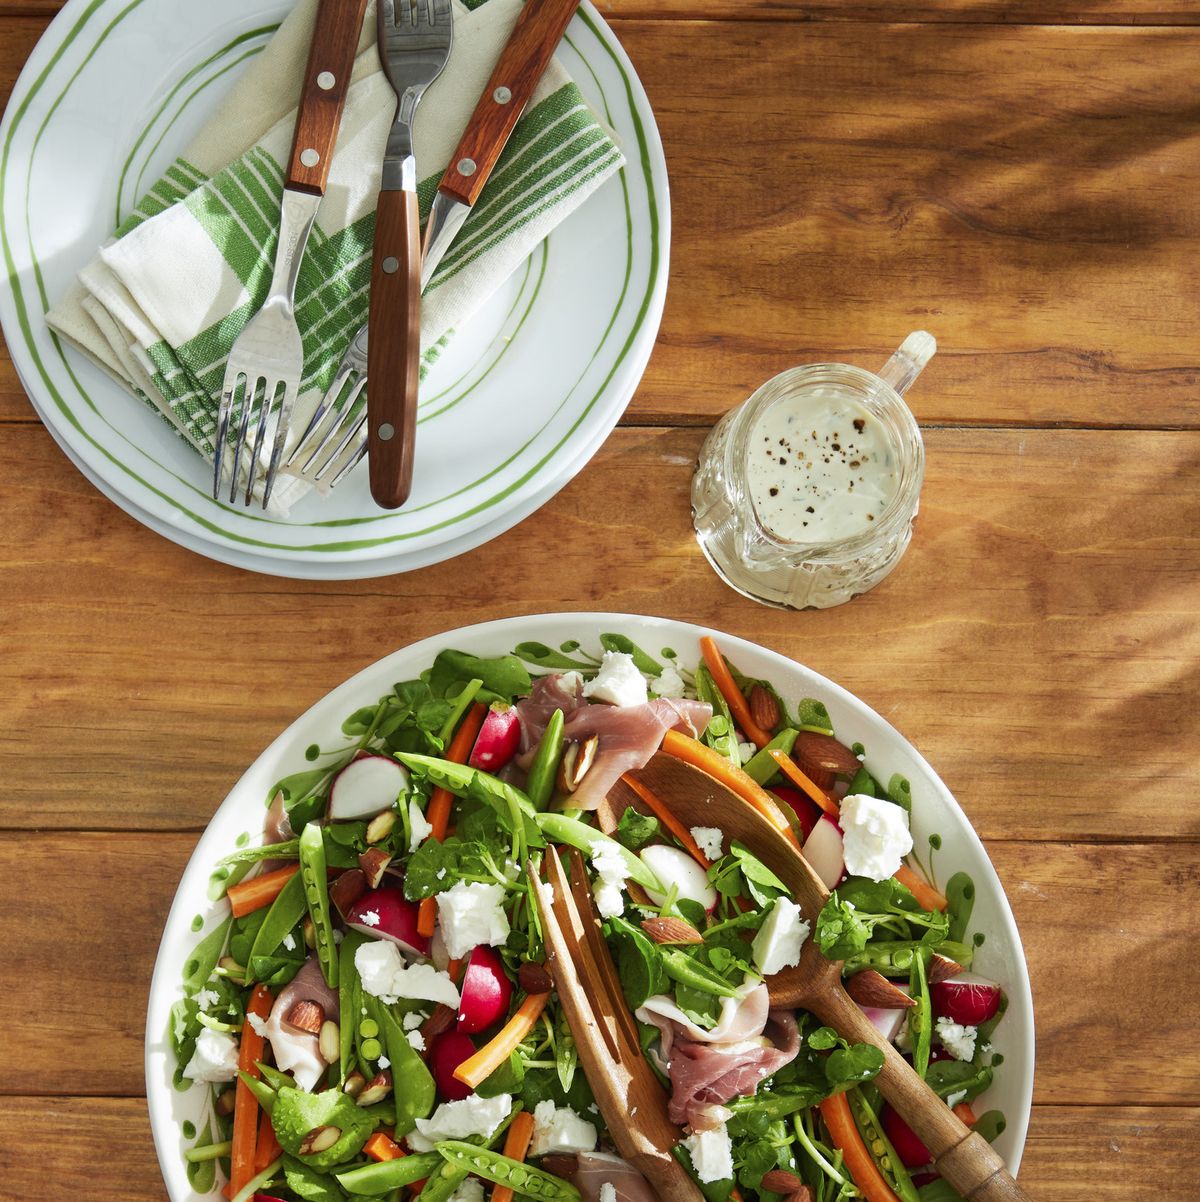 https://hips.hearstapps.com/hmg-prod/images/snap-pea-salad-with-feta-almonds-and-prosciutto-1677084752.jpg?crop=1.00xw:0.668xh;0,0.207xh&resize=1200:*